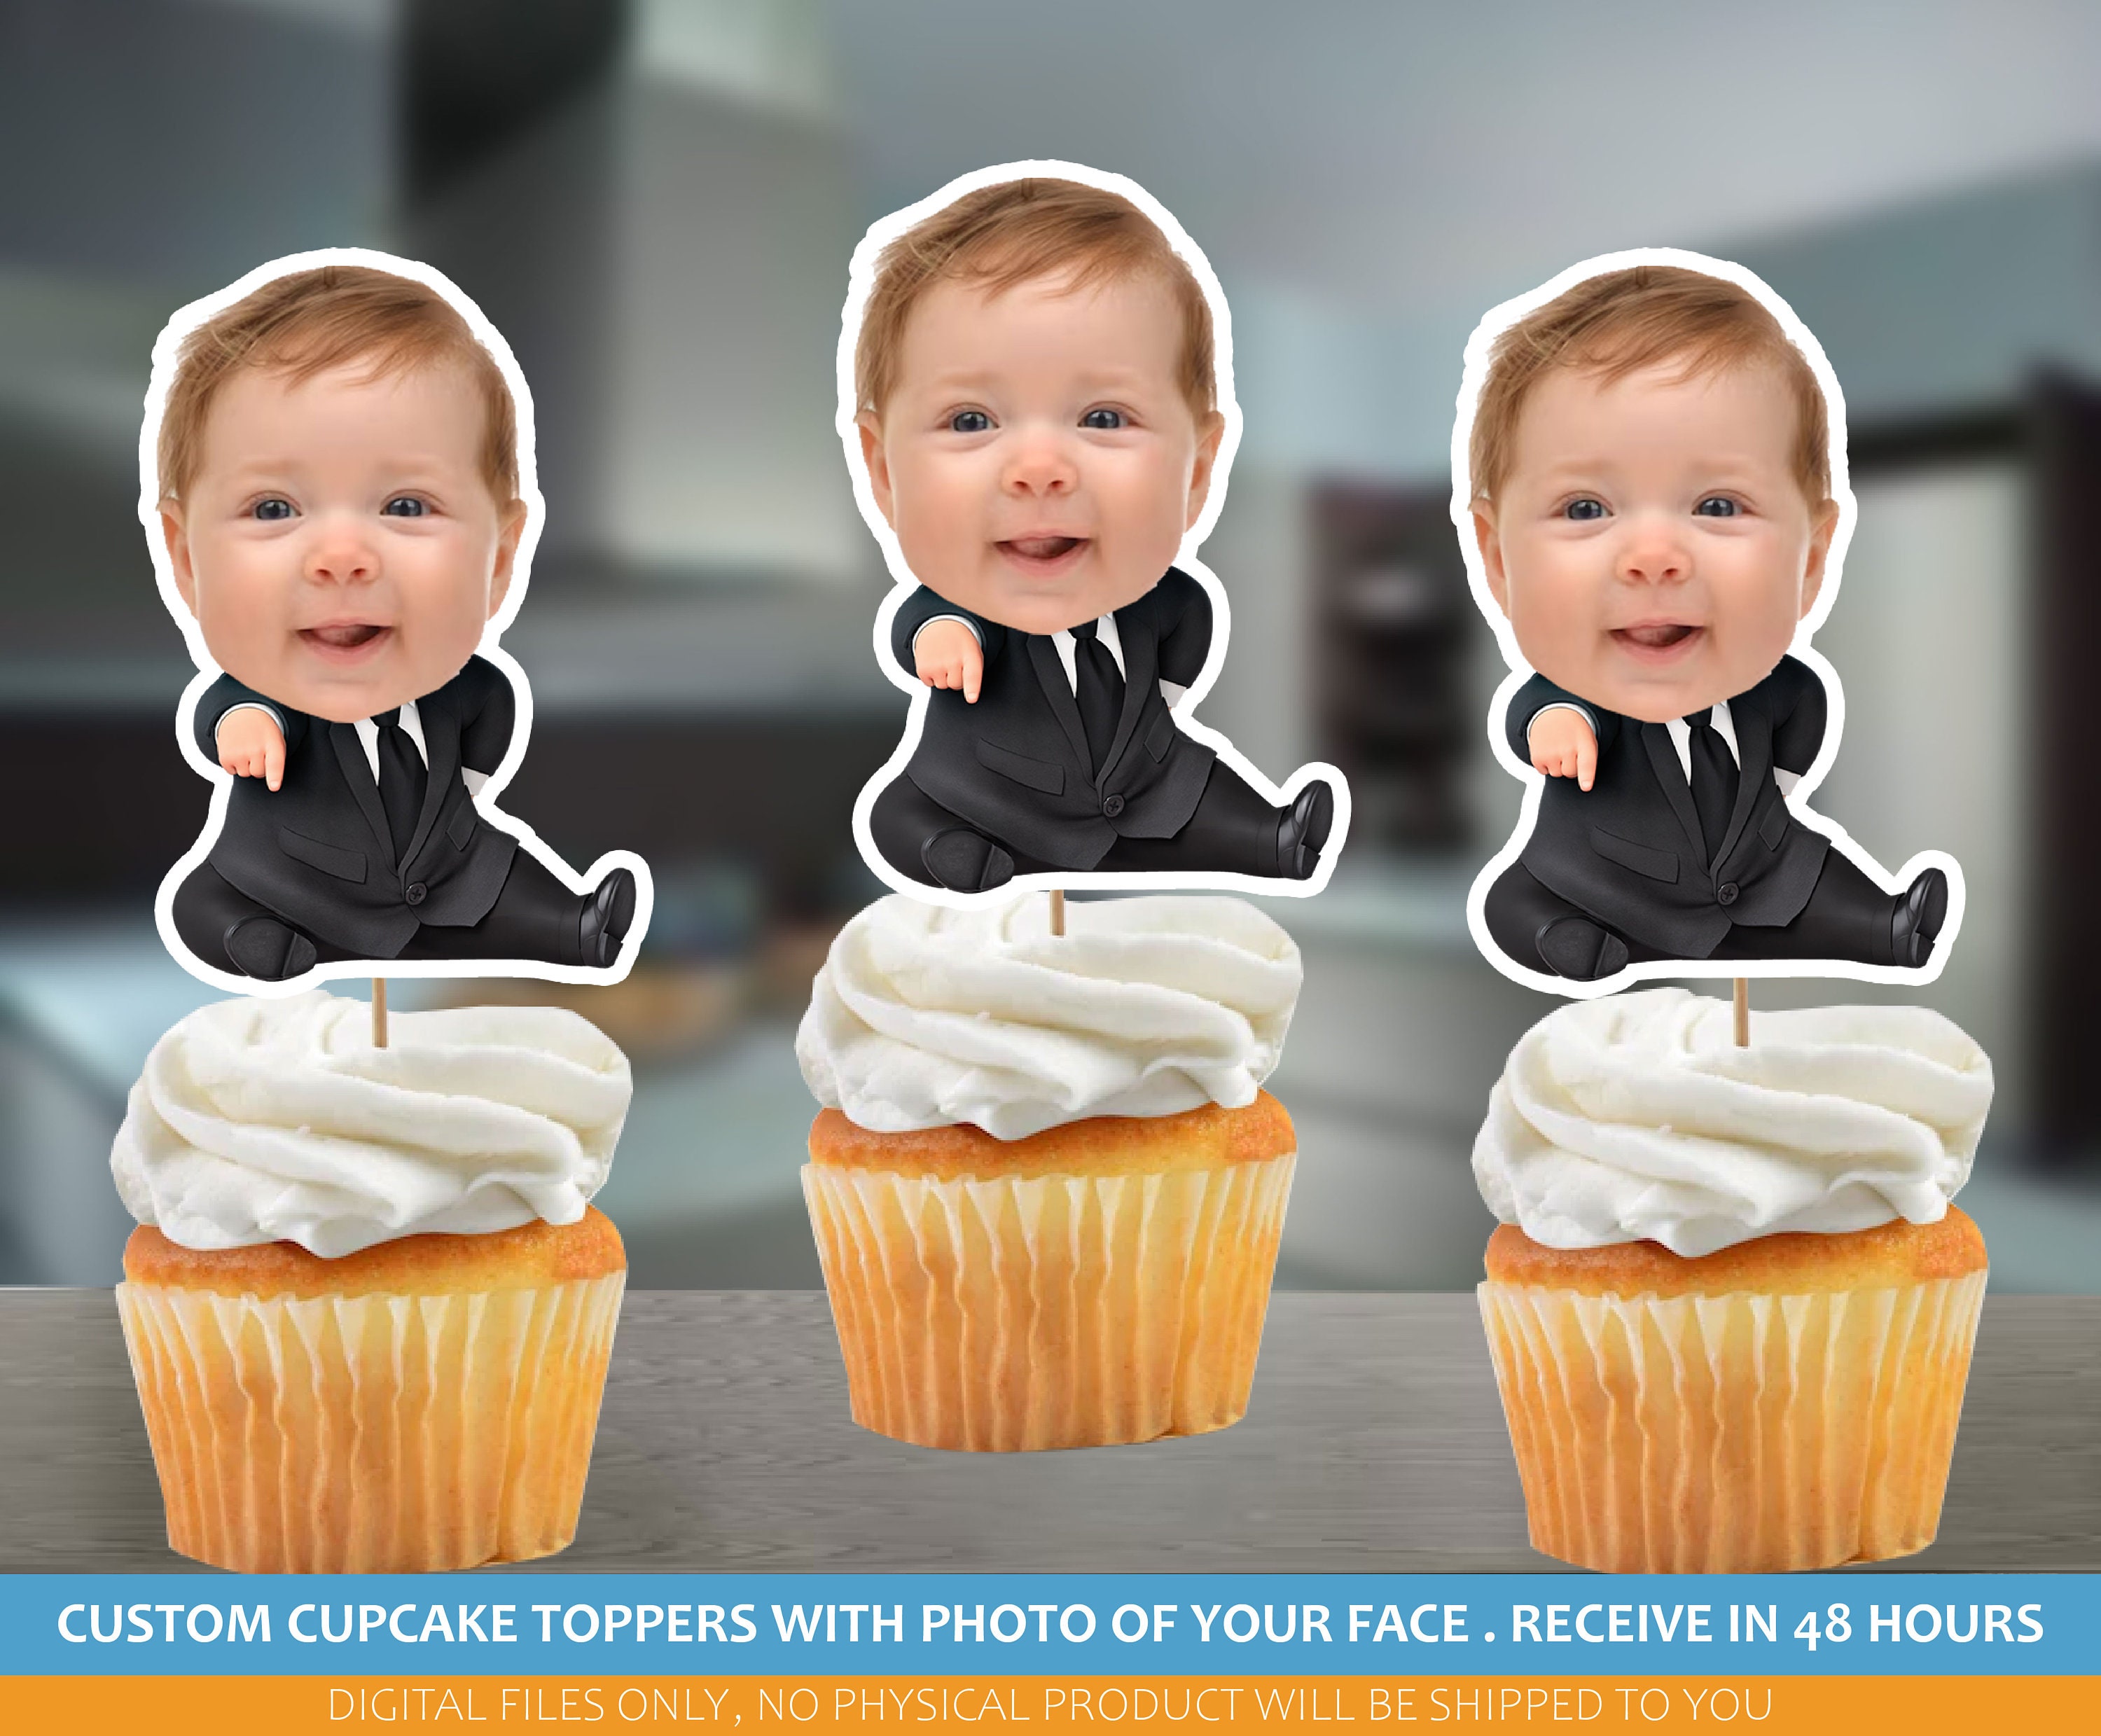 NutMeg Party Boxes - Ruthless and Toothless! BABY BOSS Cupcake toppers 👶🏼  . . . . . . #babyboss #cupcaketoppers #customorder #customdesign #party  #cake #nutmegpartyboxes #mompreneur